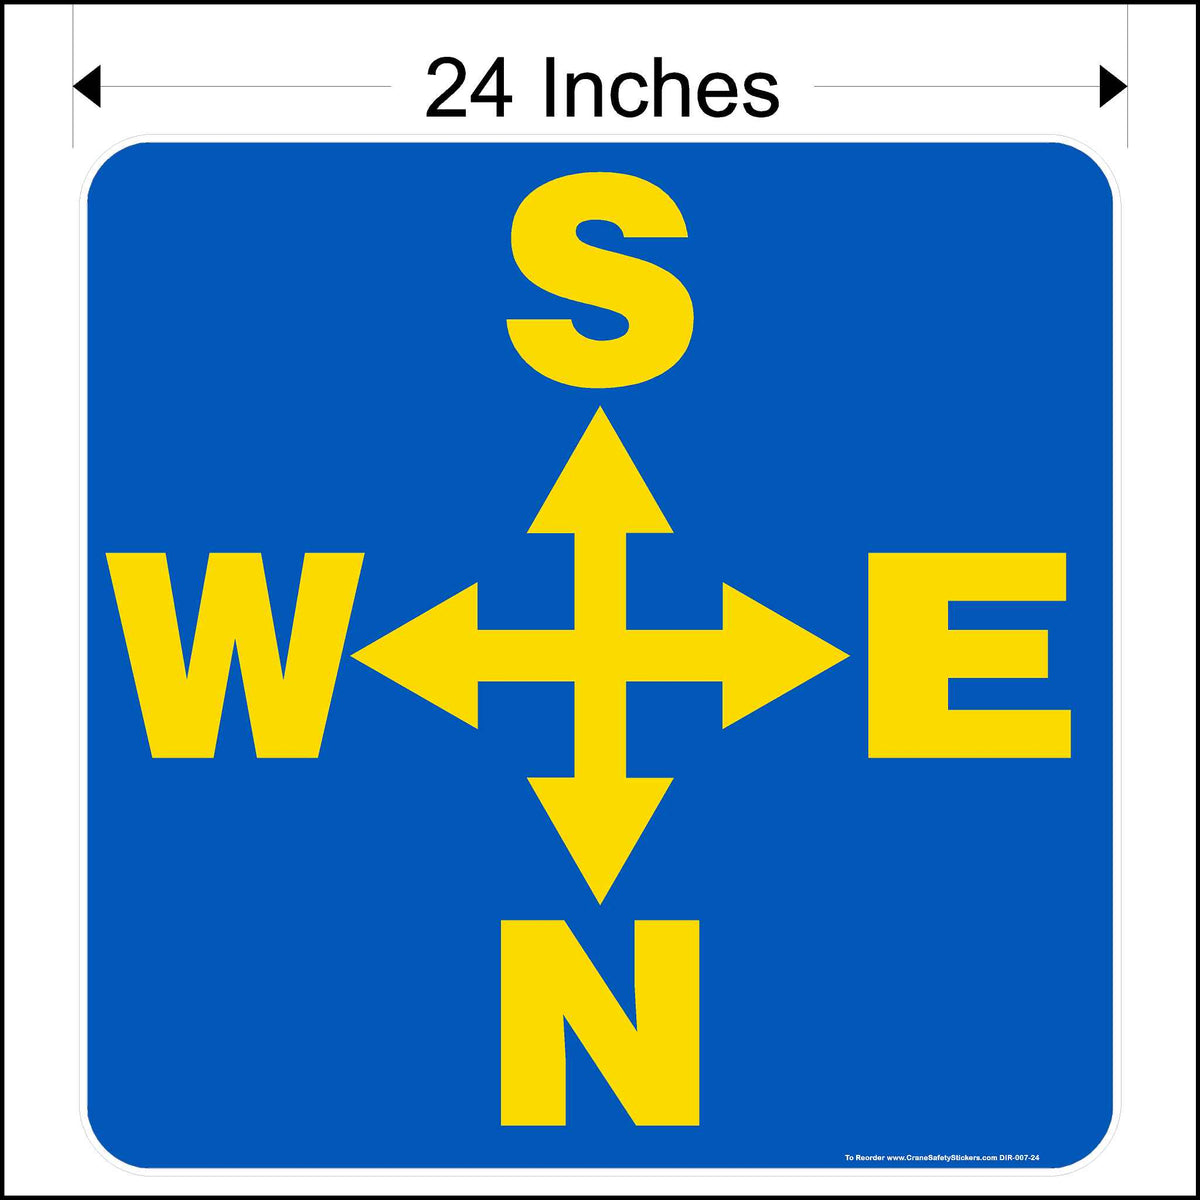 Twenty four inch overhead crane decal printed with yellow south, notrth, east, and west arrows on a blue background.